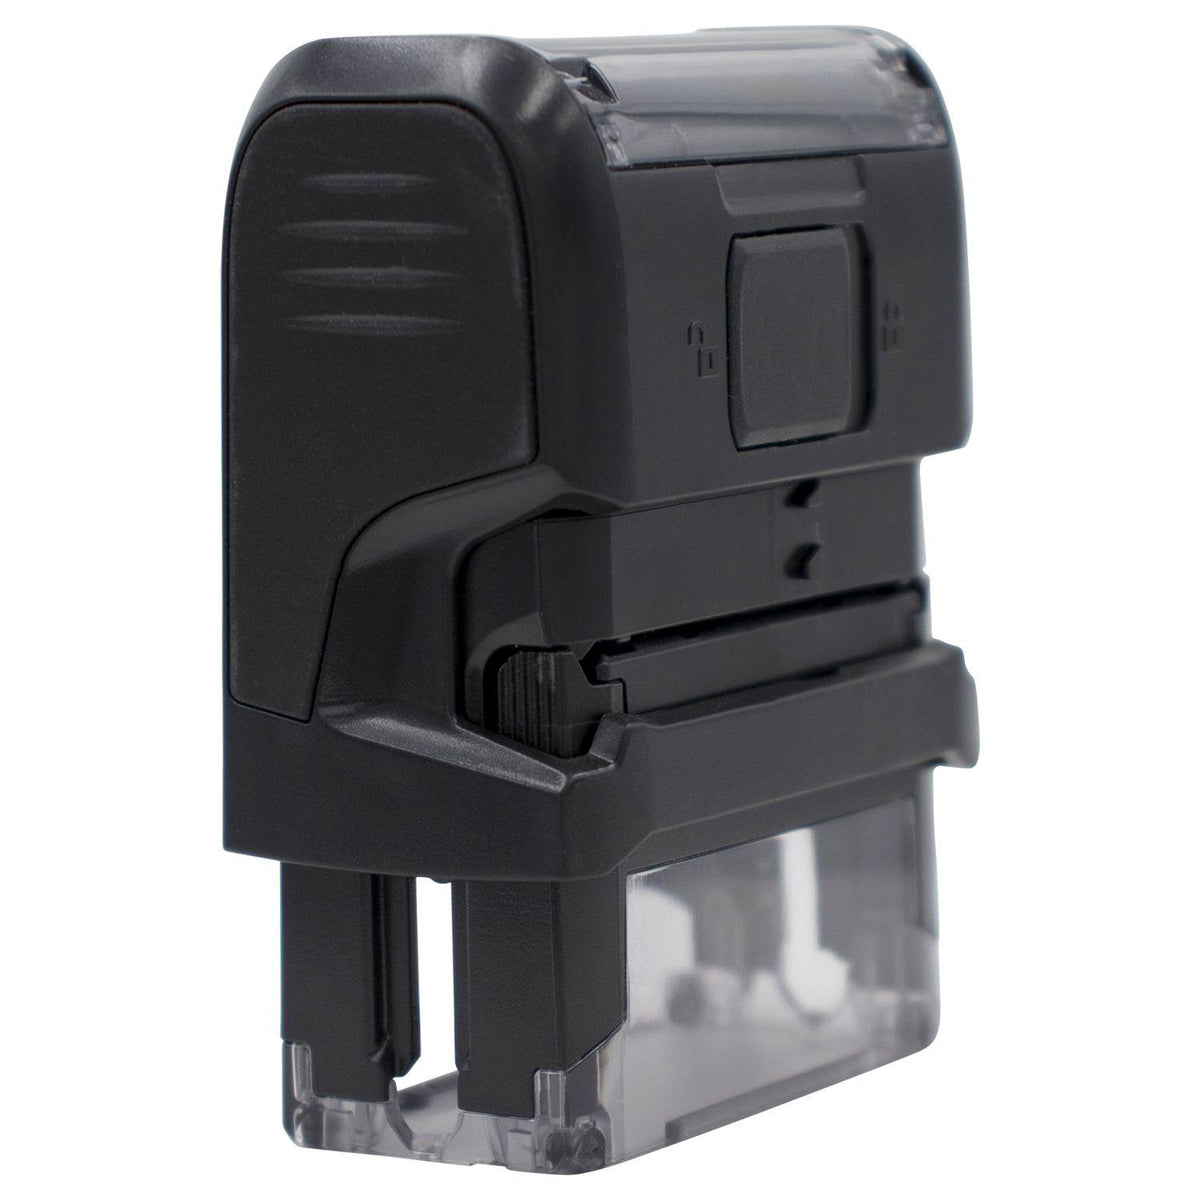 Large Self-Inking Optima Confidential Stamp - Engineer Seal Stamps - Brand_Trodat, Impression Size_Large, Stamp Type_Self-Inking Stamp, Type of Use_General, Type of Use_Office, Type of Use_Professional